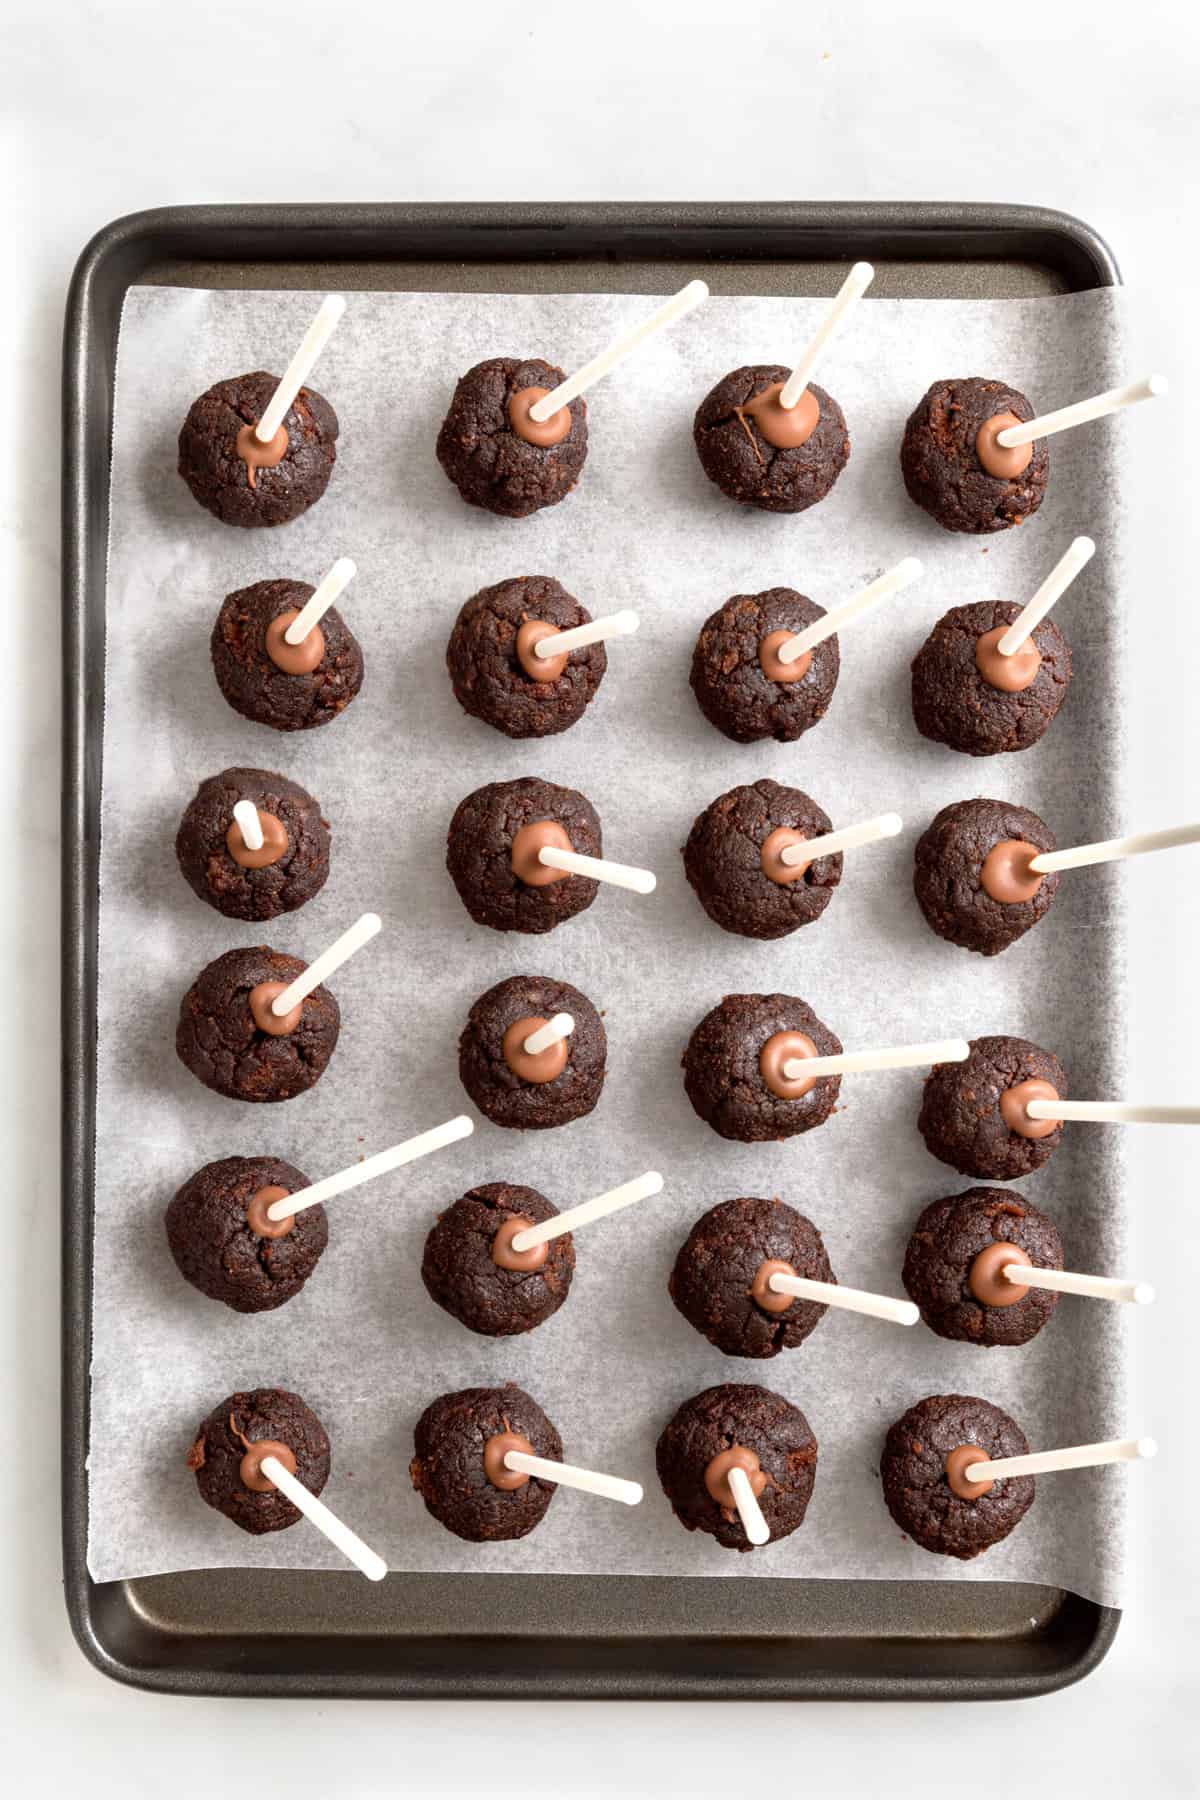 24 chocolate cake pops with sticks arranged on a parchment-lined baking tray. 